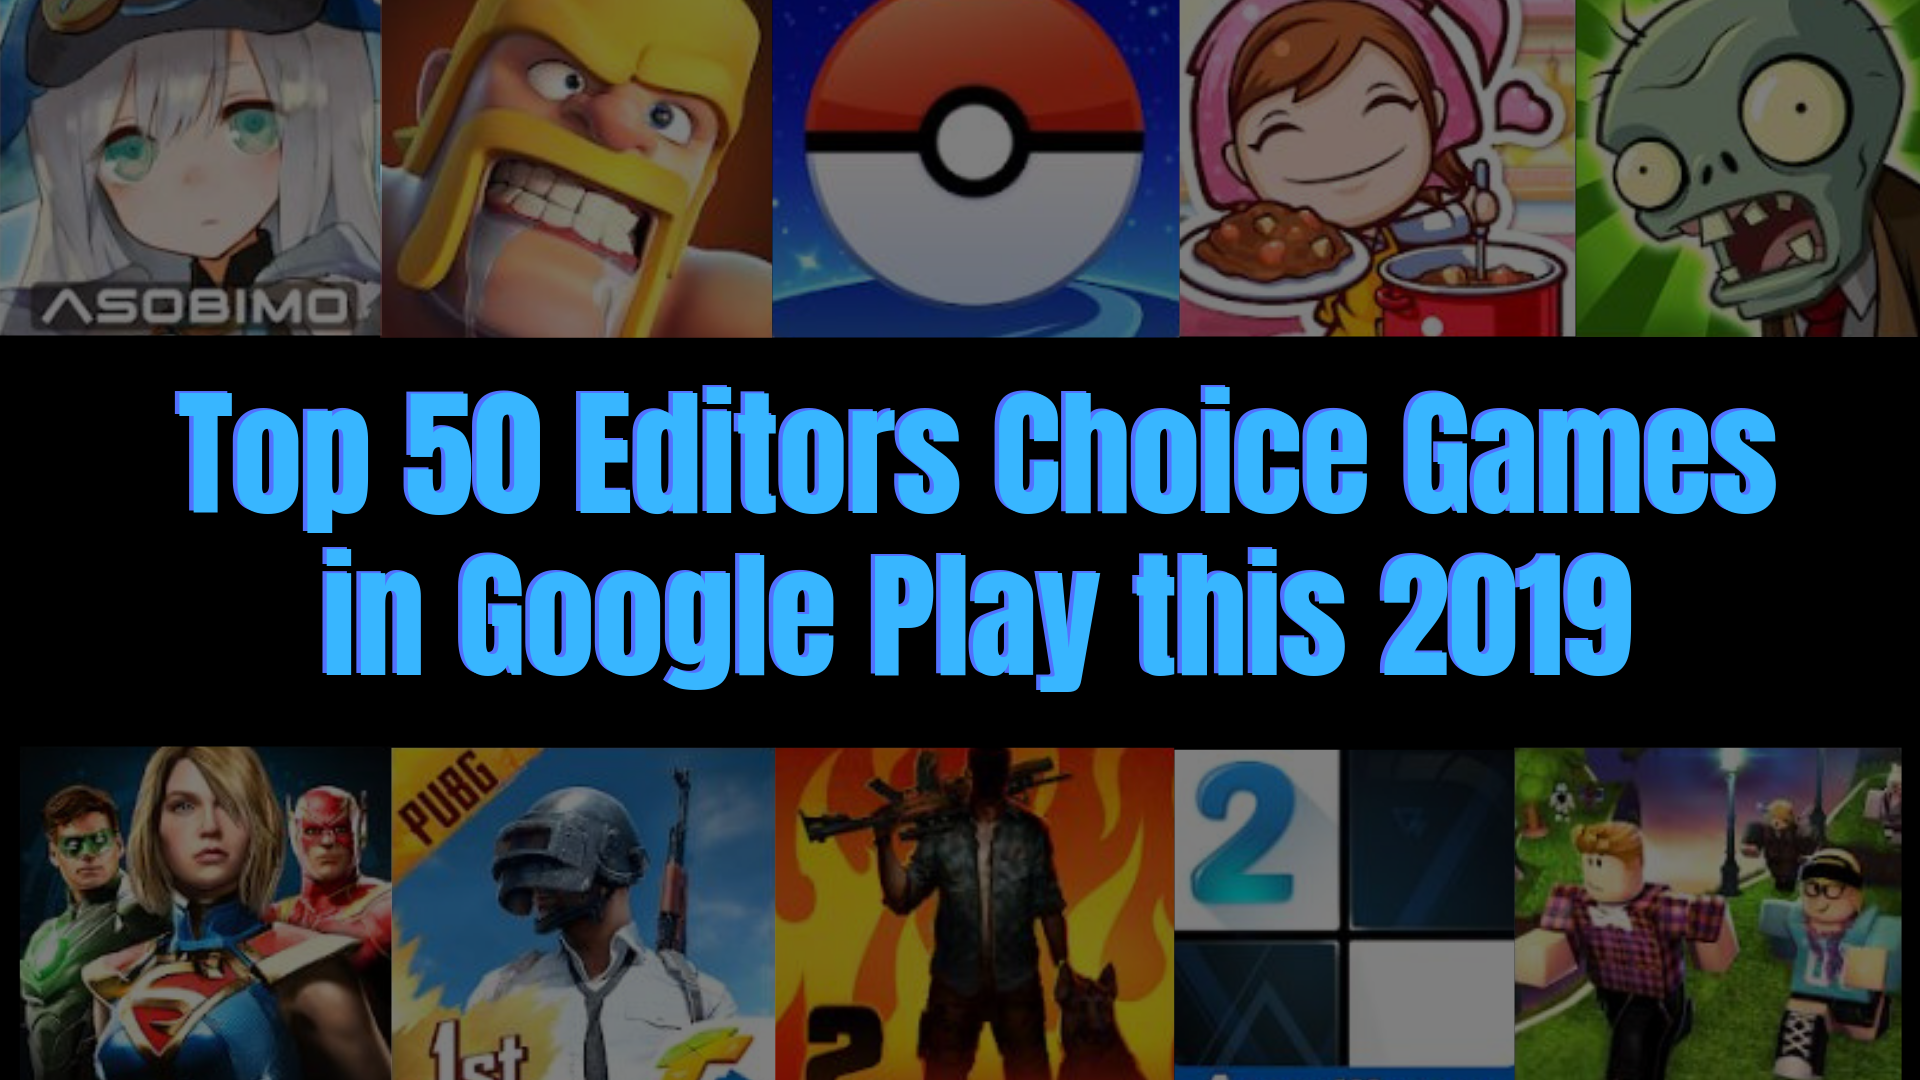 Top 50 Editors Choice Games in Google Play this 2019